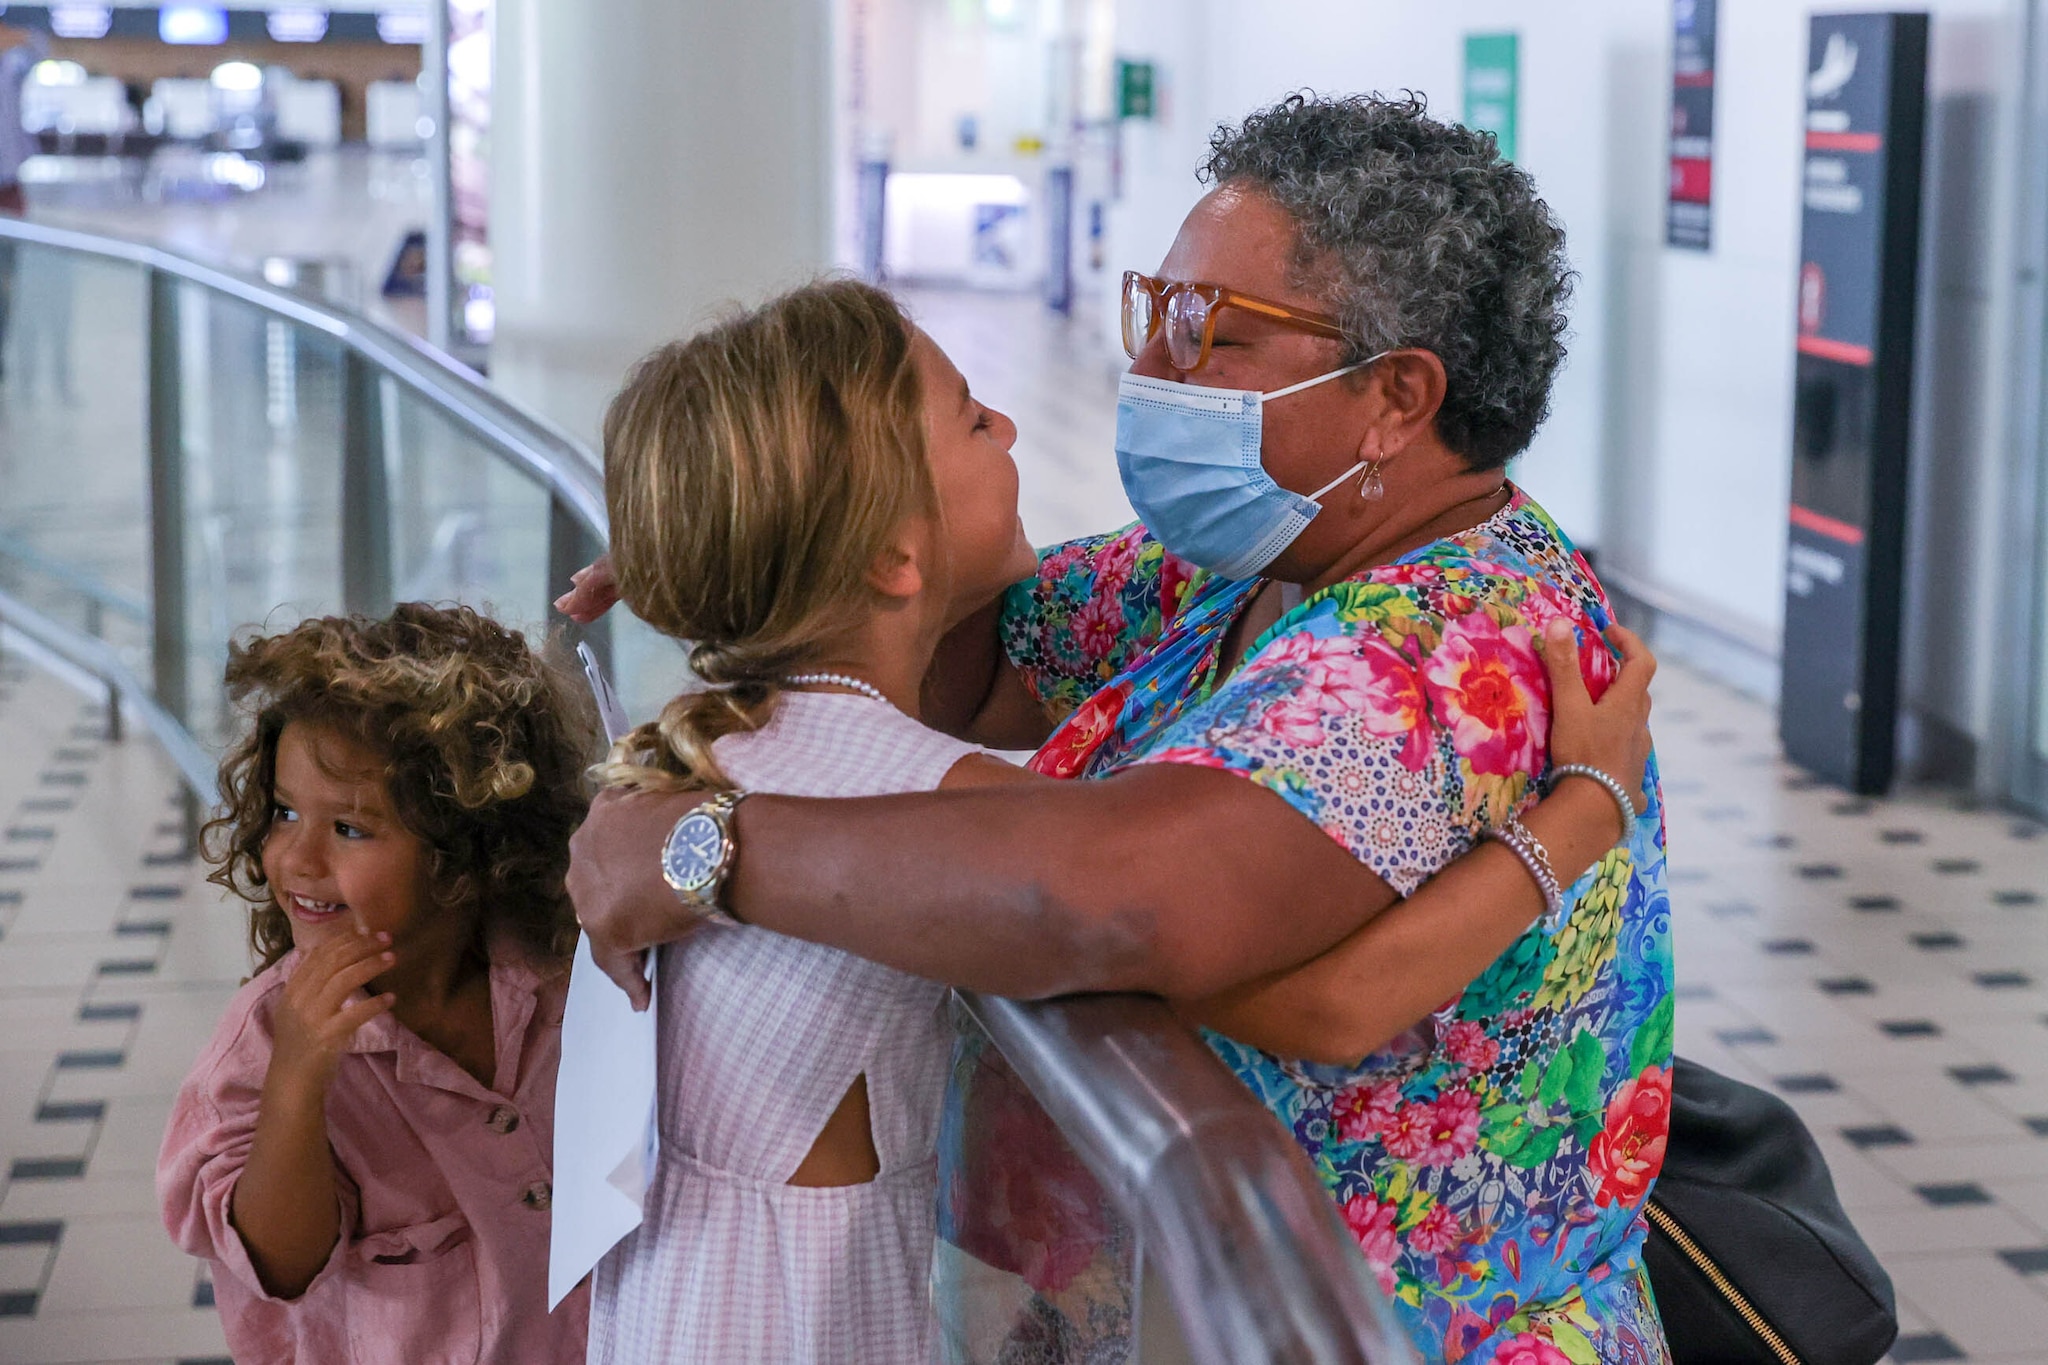 Queensland scrapped quarantine for some international arrivals in January, allowing family reunions to take place.